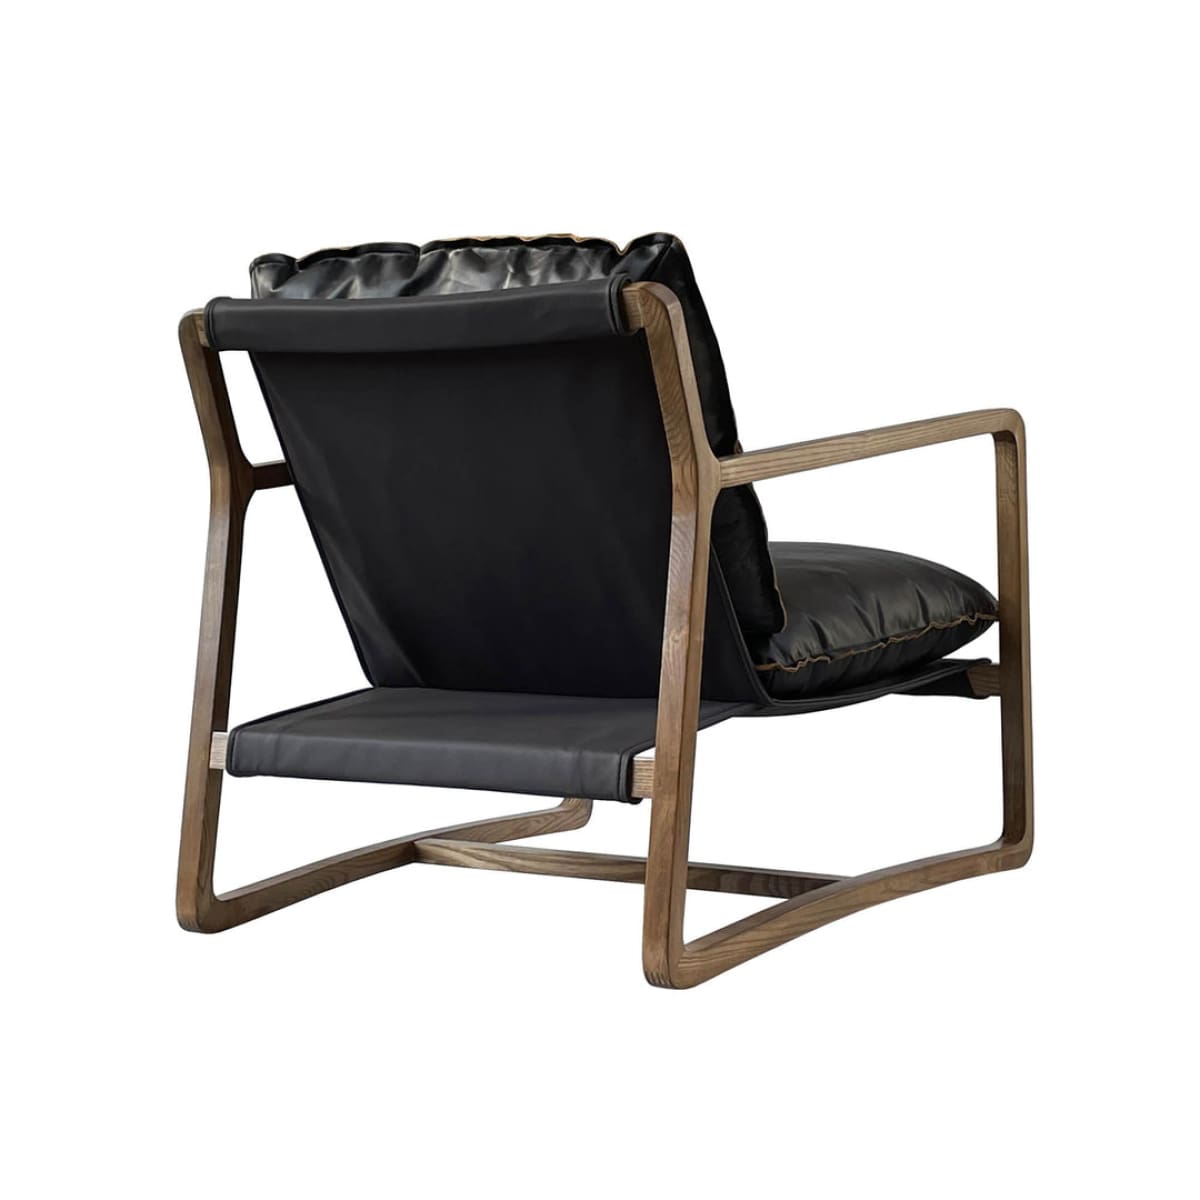 Relax Club Chair - Black Leather With Black Pu Frame - lh-import-accent-club-chairs